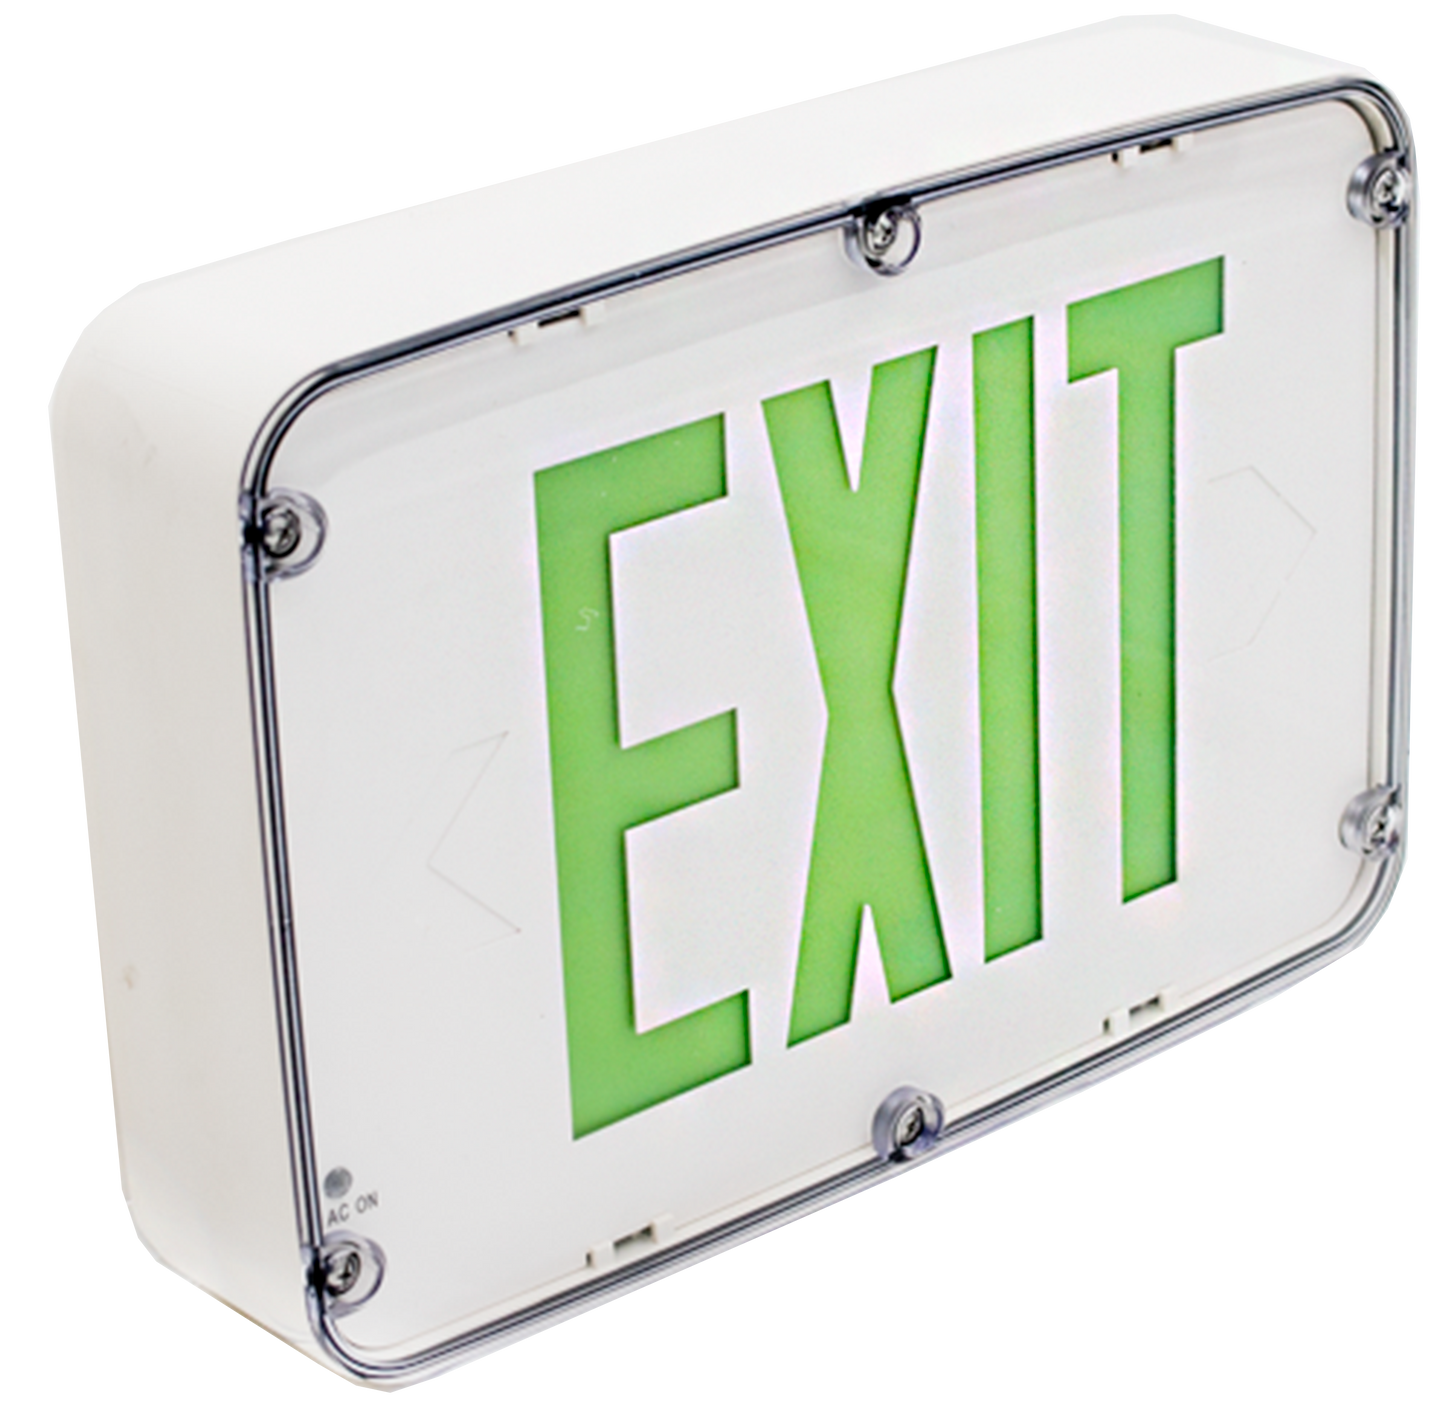 Westgate Lighting  Nema 4X Rated Led Exit Sign, Double Face, Green White Em Incl.  XTN4X-2GWEM